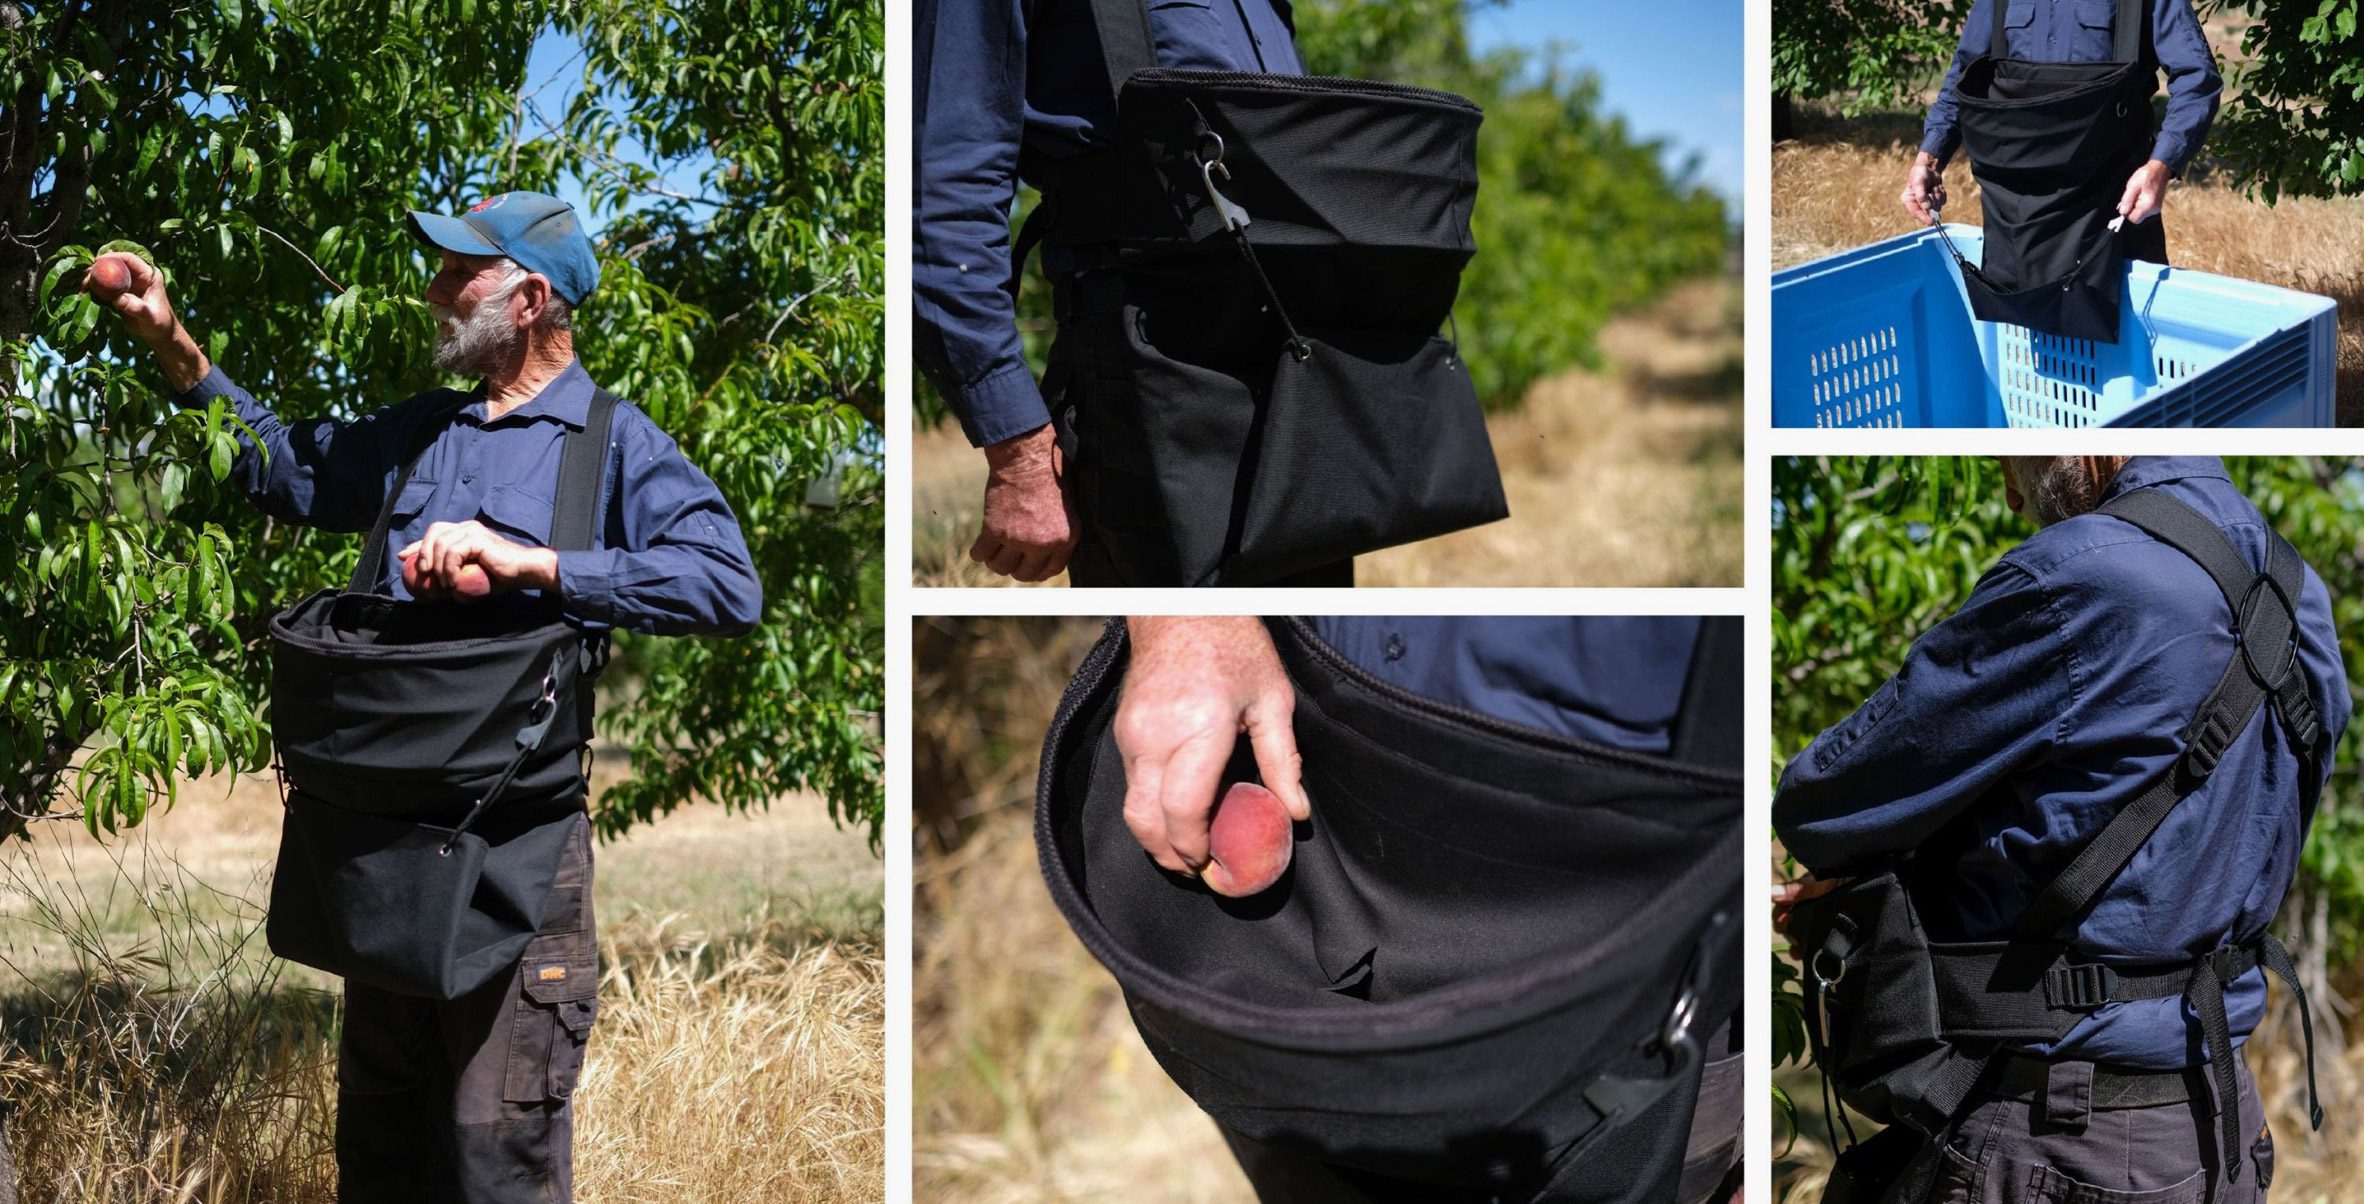 Collage of images showing someone picking fruit while wearing a large black bag